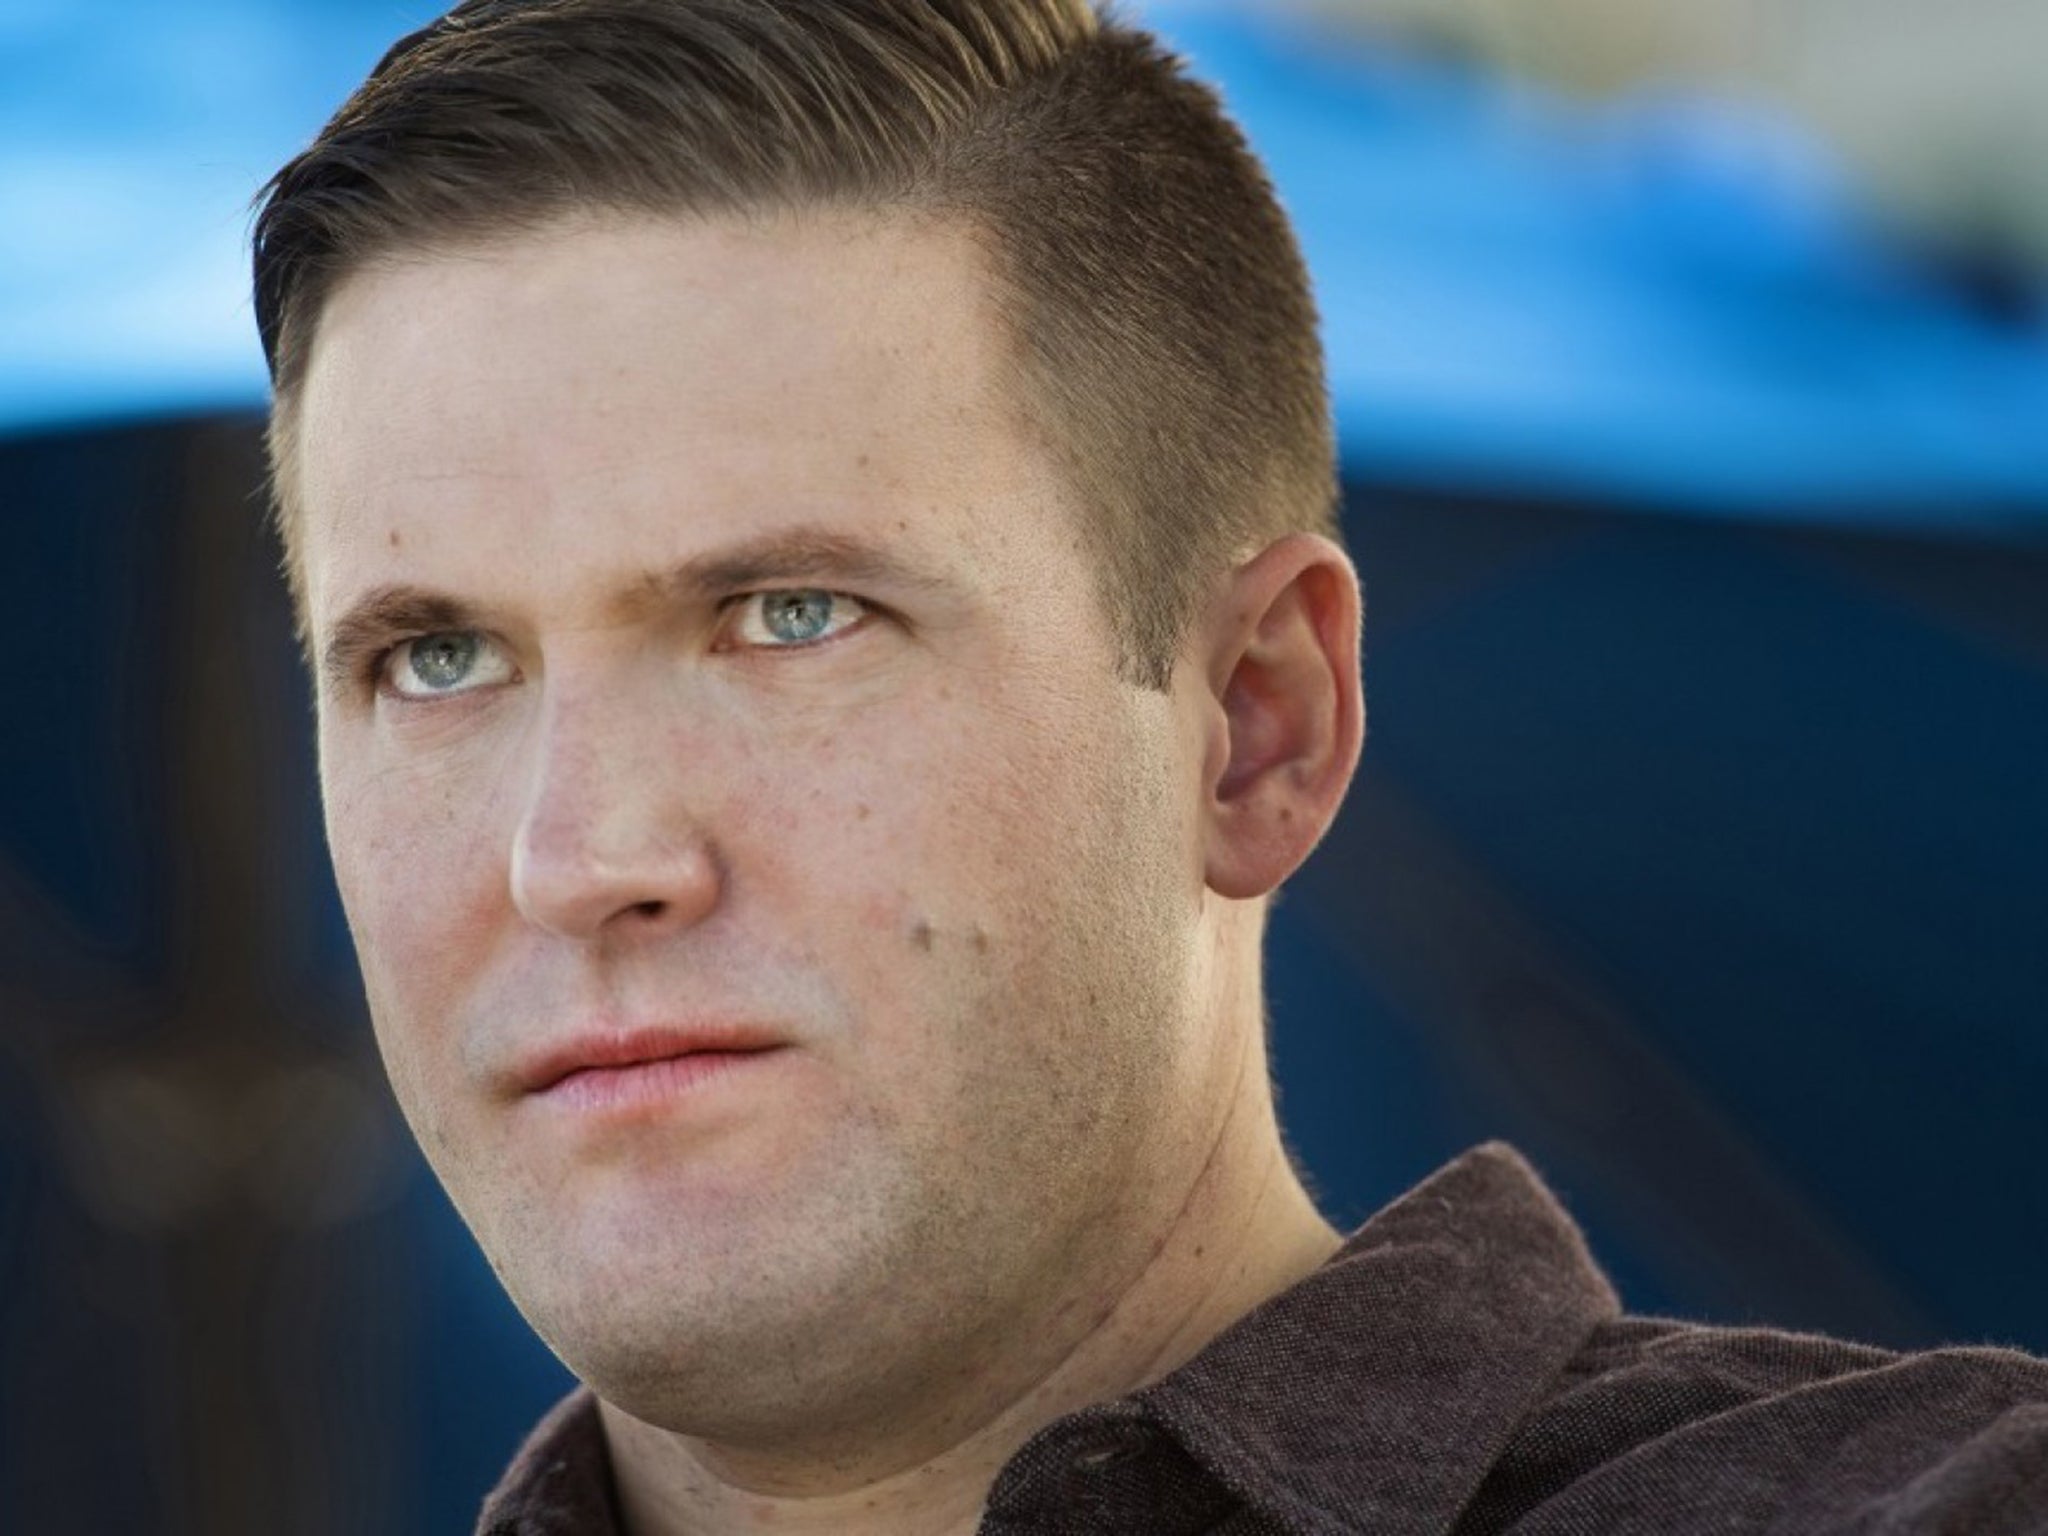 White supremacist Richard Spencer is part of a movement which has been emboldened in the wake of Donald Trump